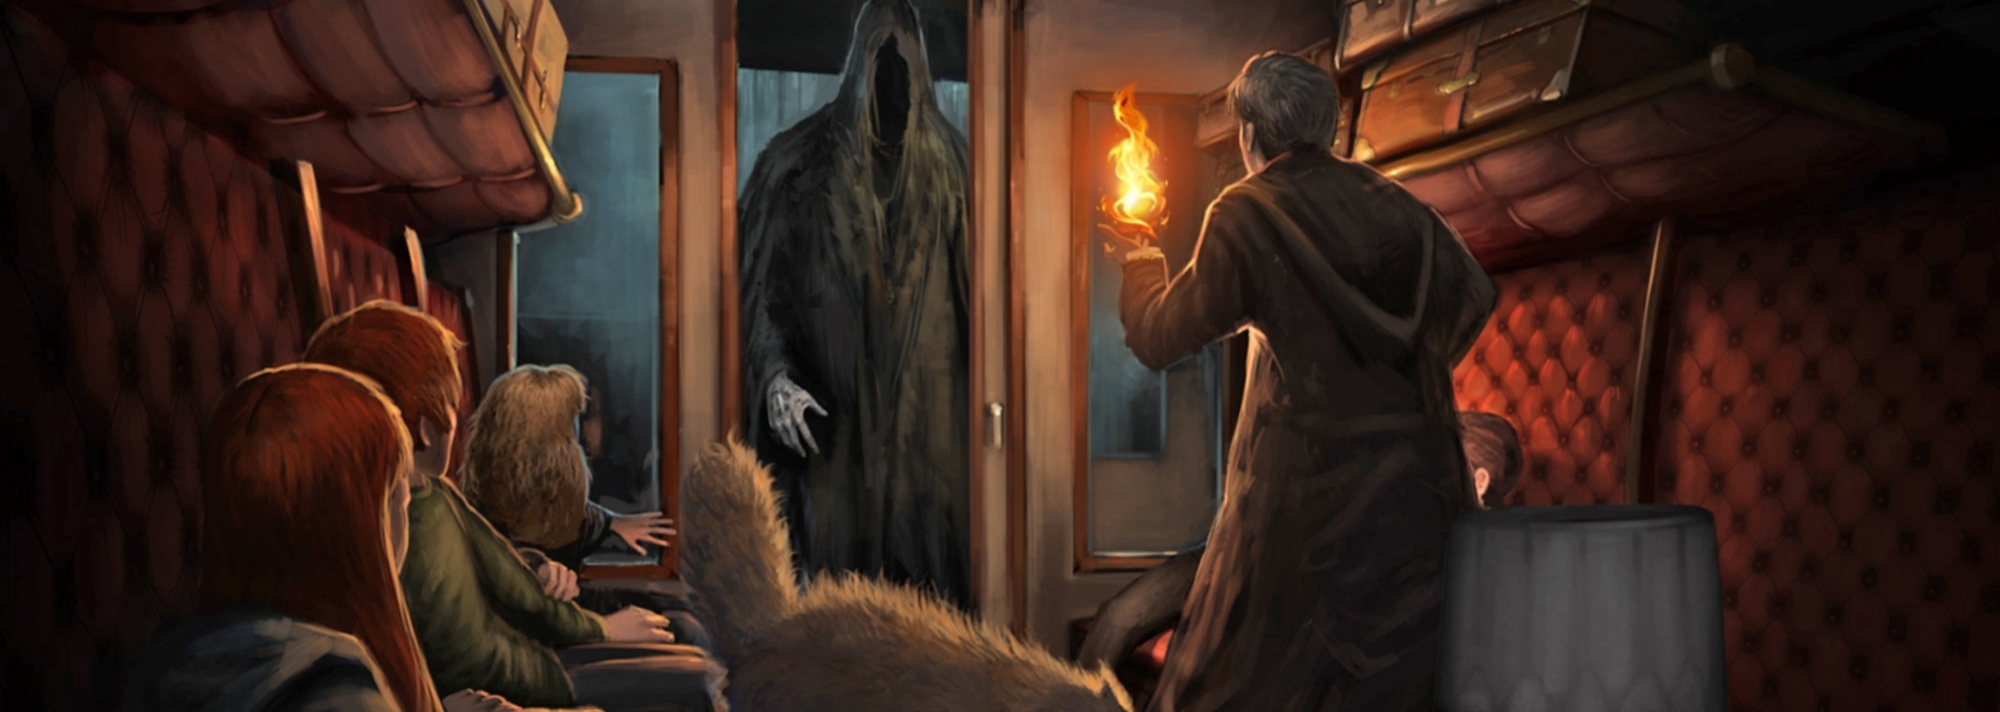 The Dementor on the Hogwarts Express 